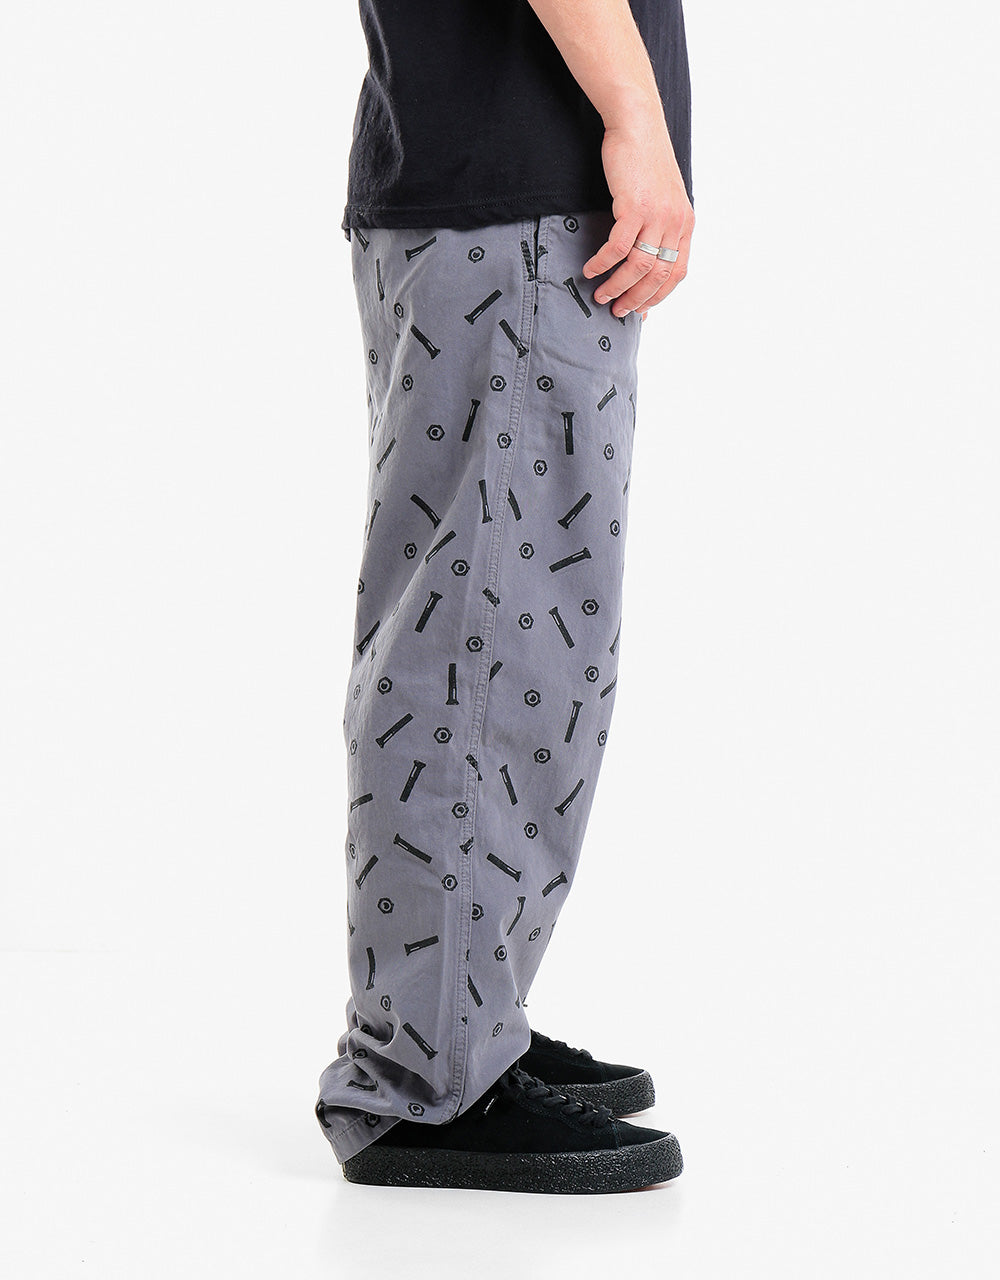 Route One Organic Baggy Pants - Nuts & Bolts